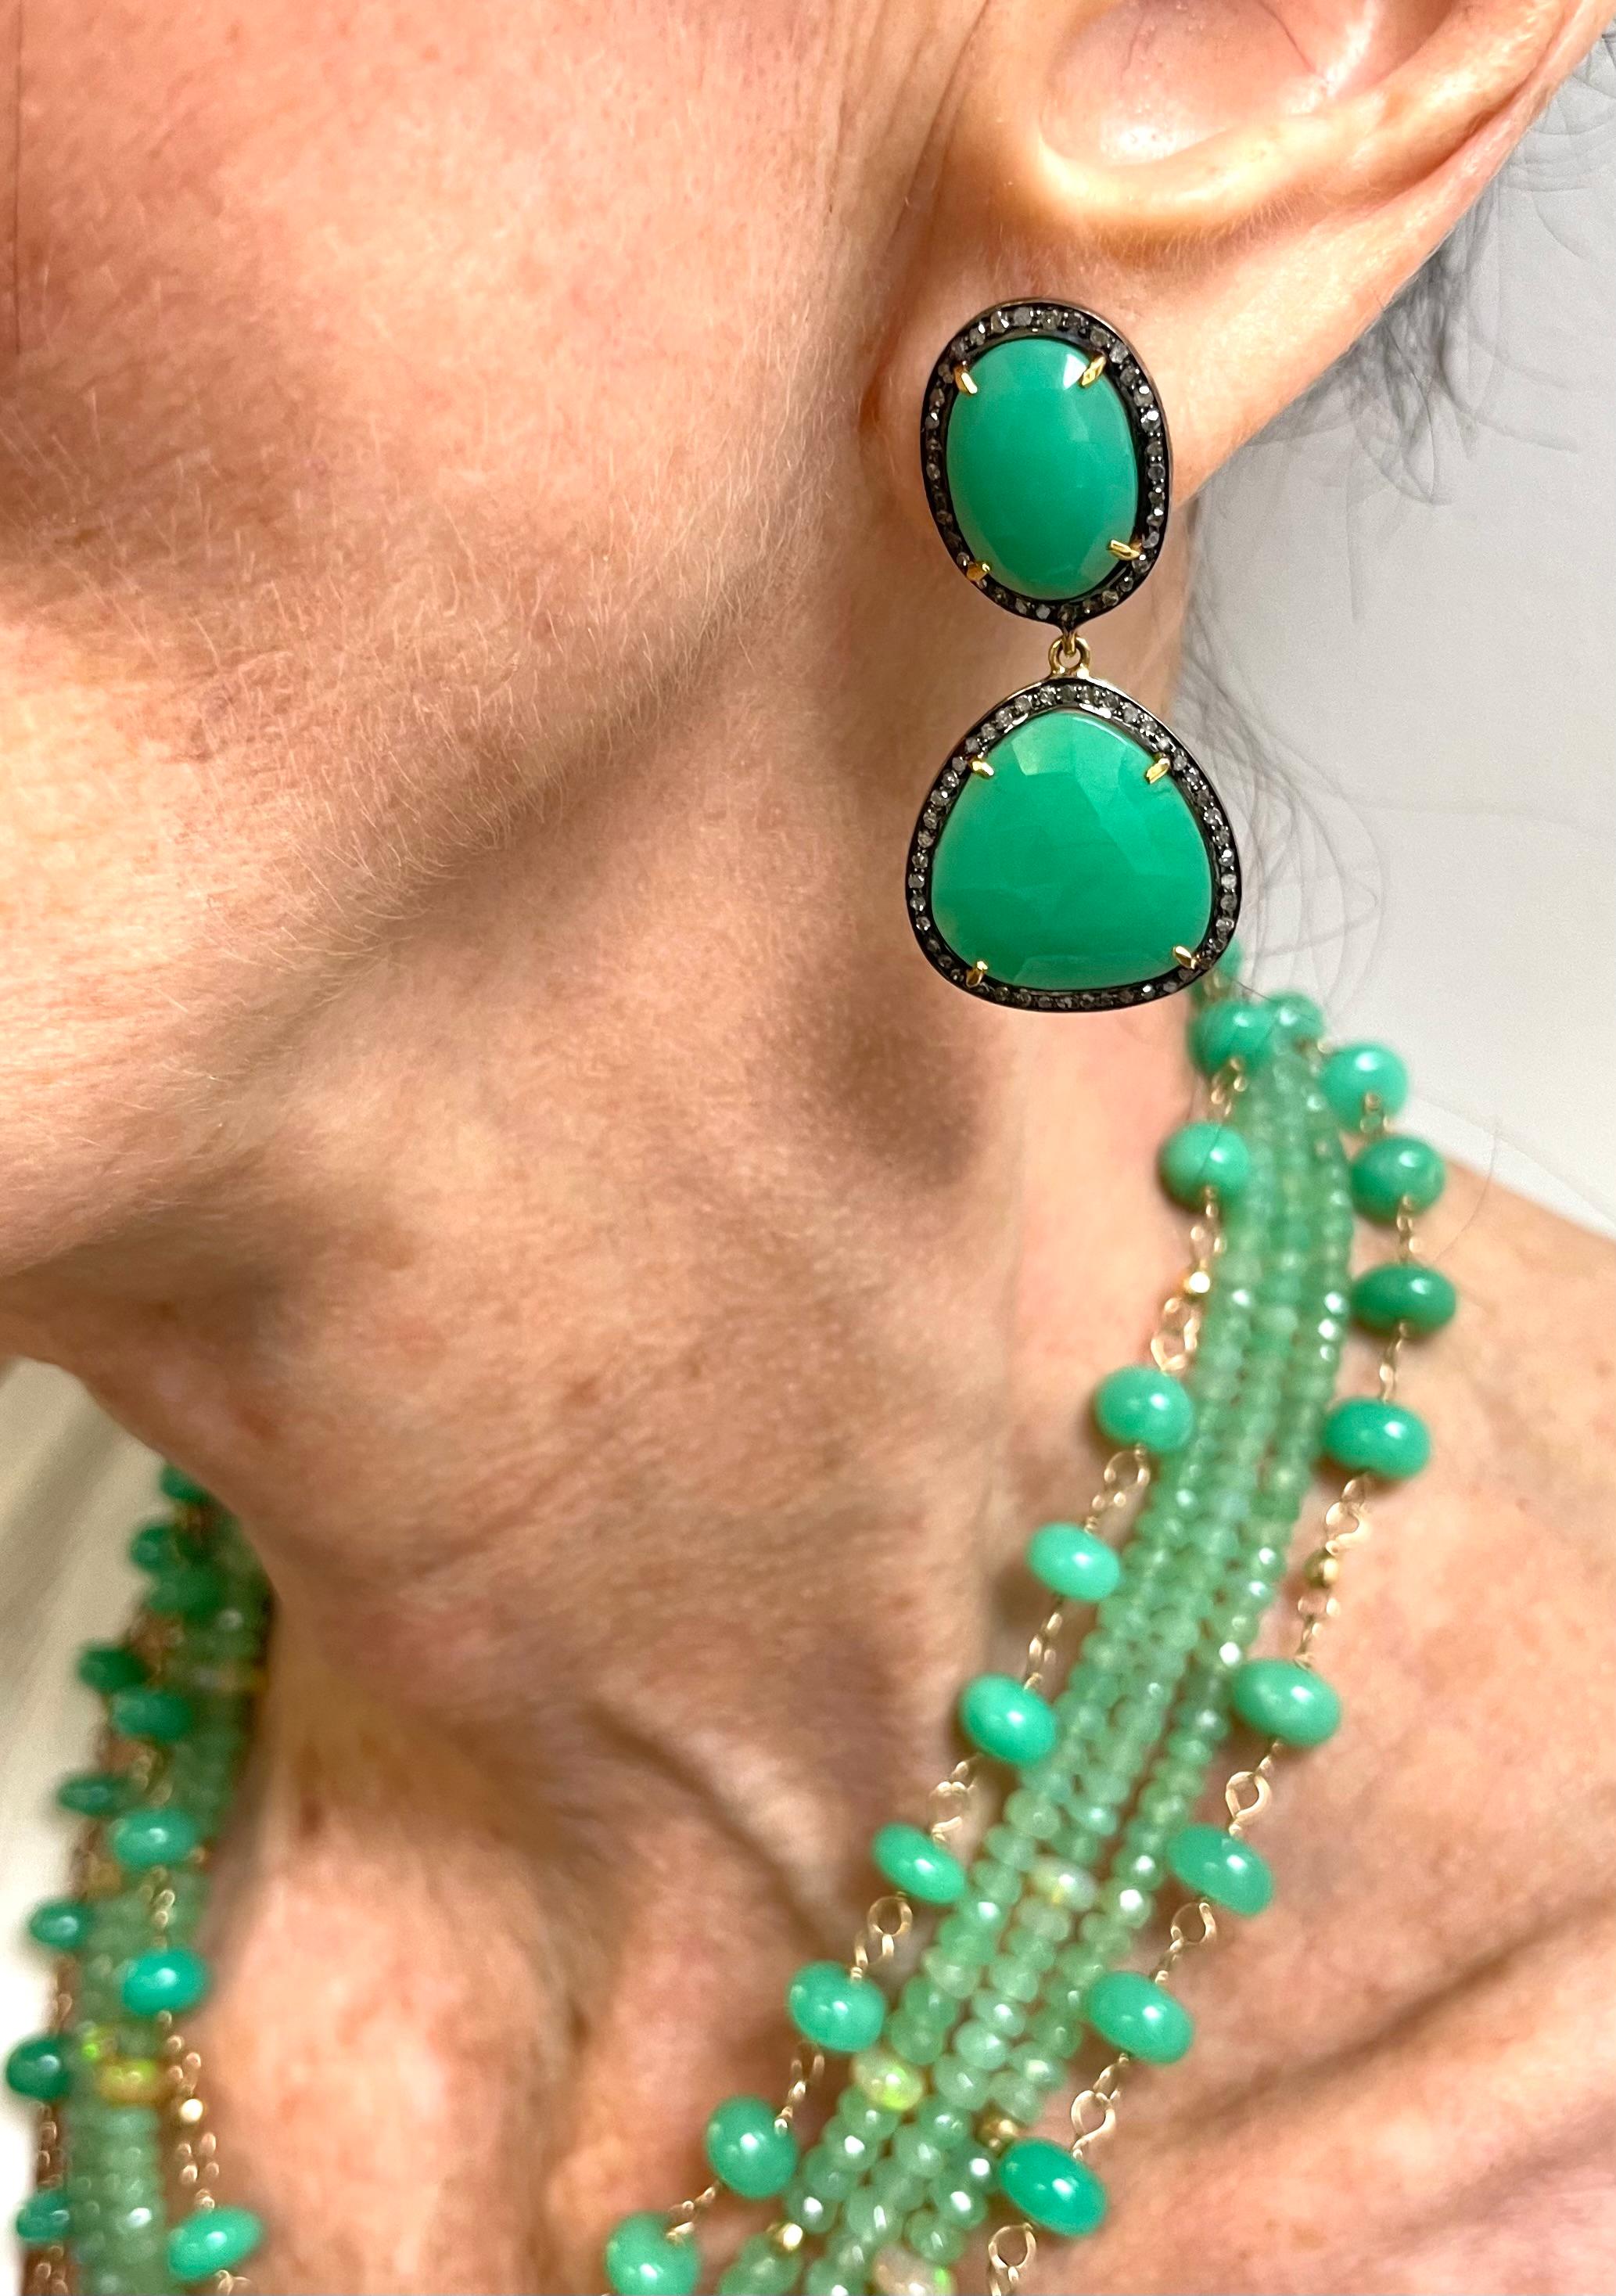 Description
Vivid green faceted Chrysoprase surrounded with pave diamonds in a contrasting black rhodium frame sets off the green, giving the earrings and edgy modern look.
Item #E2422 
For a complete look pair it with a matching necklace (Item #